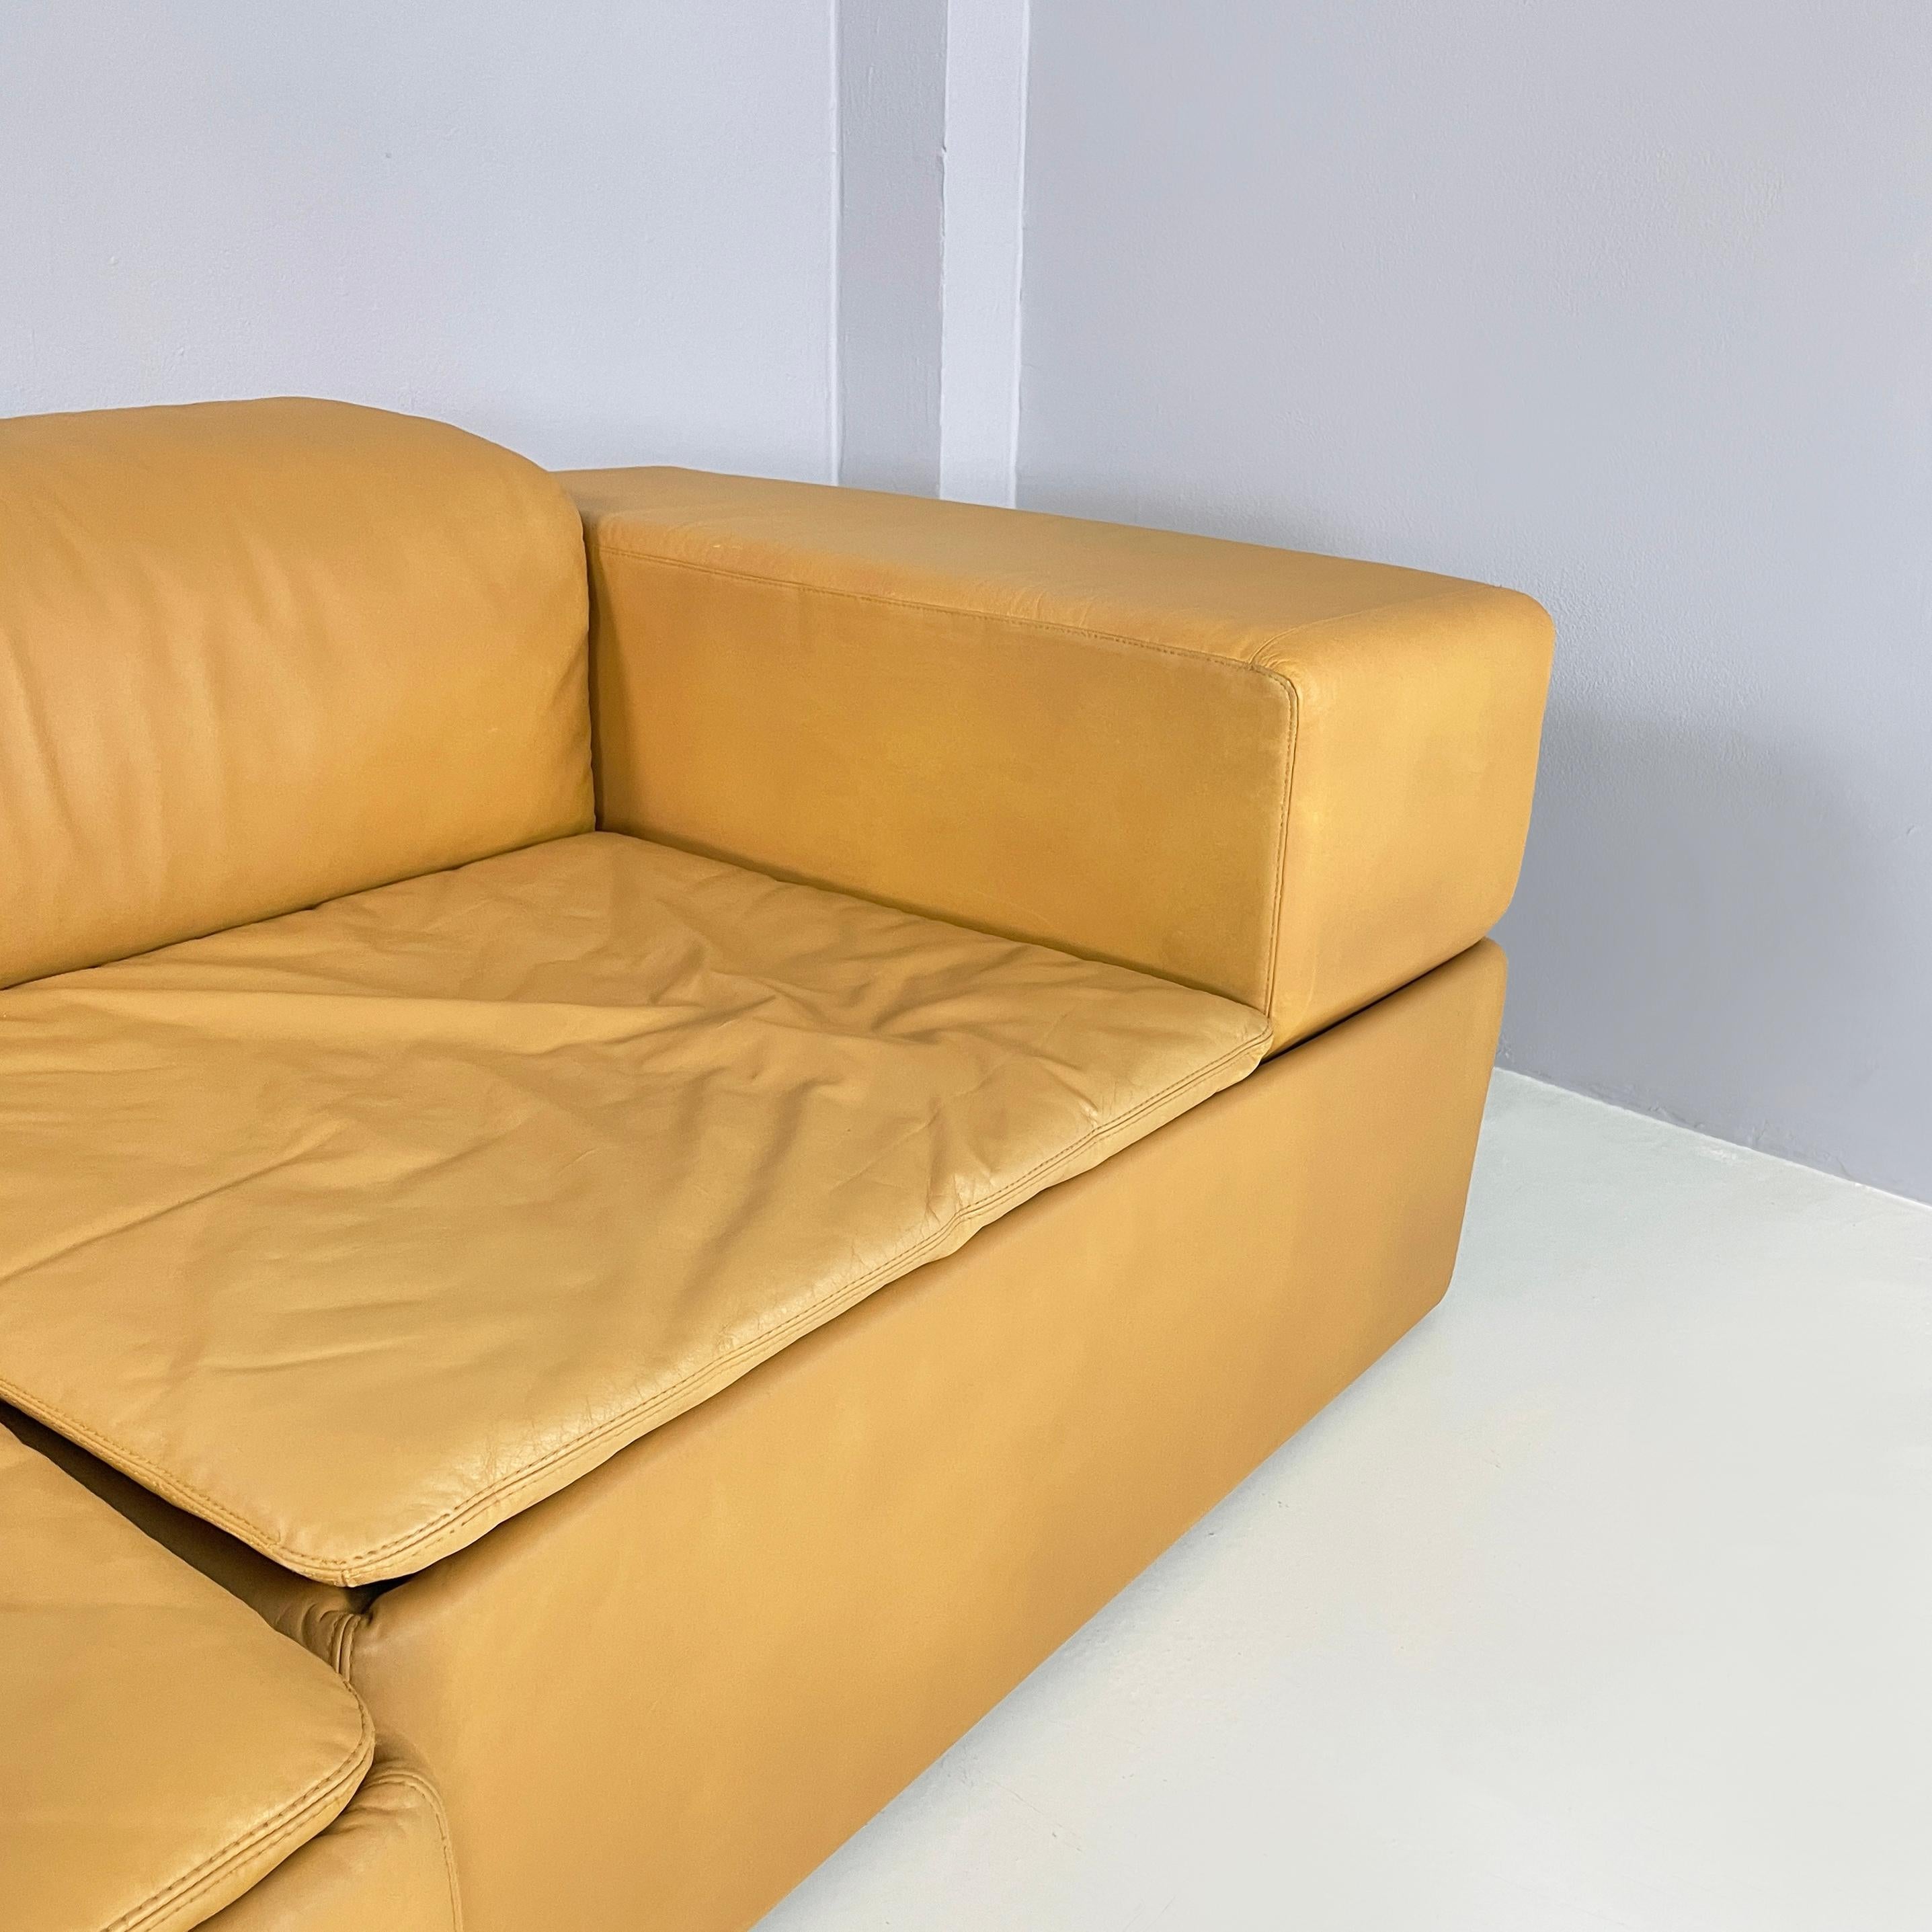 Italian modern Brown leather modular sofa Paione by Salocchi for Sormani, 1970s For Sale 4